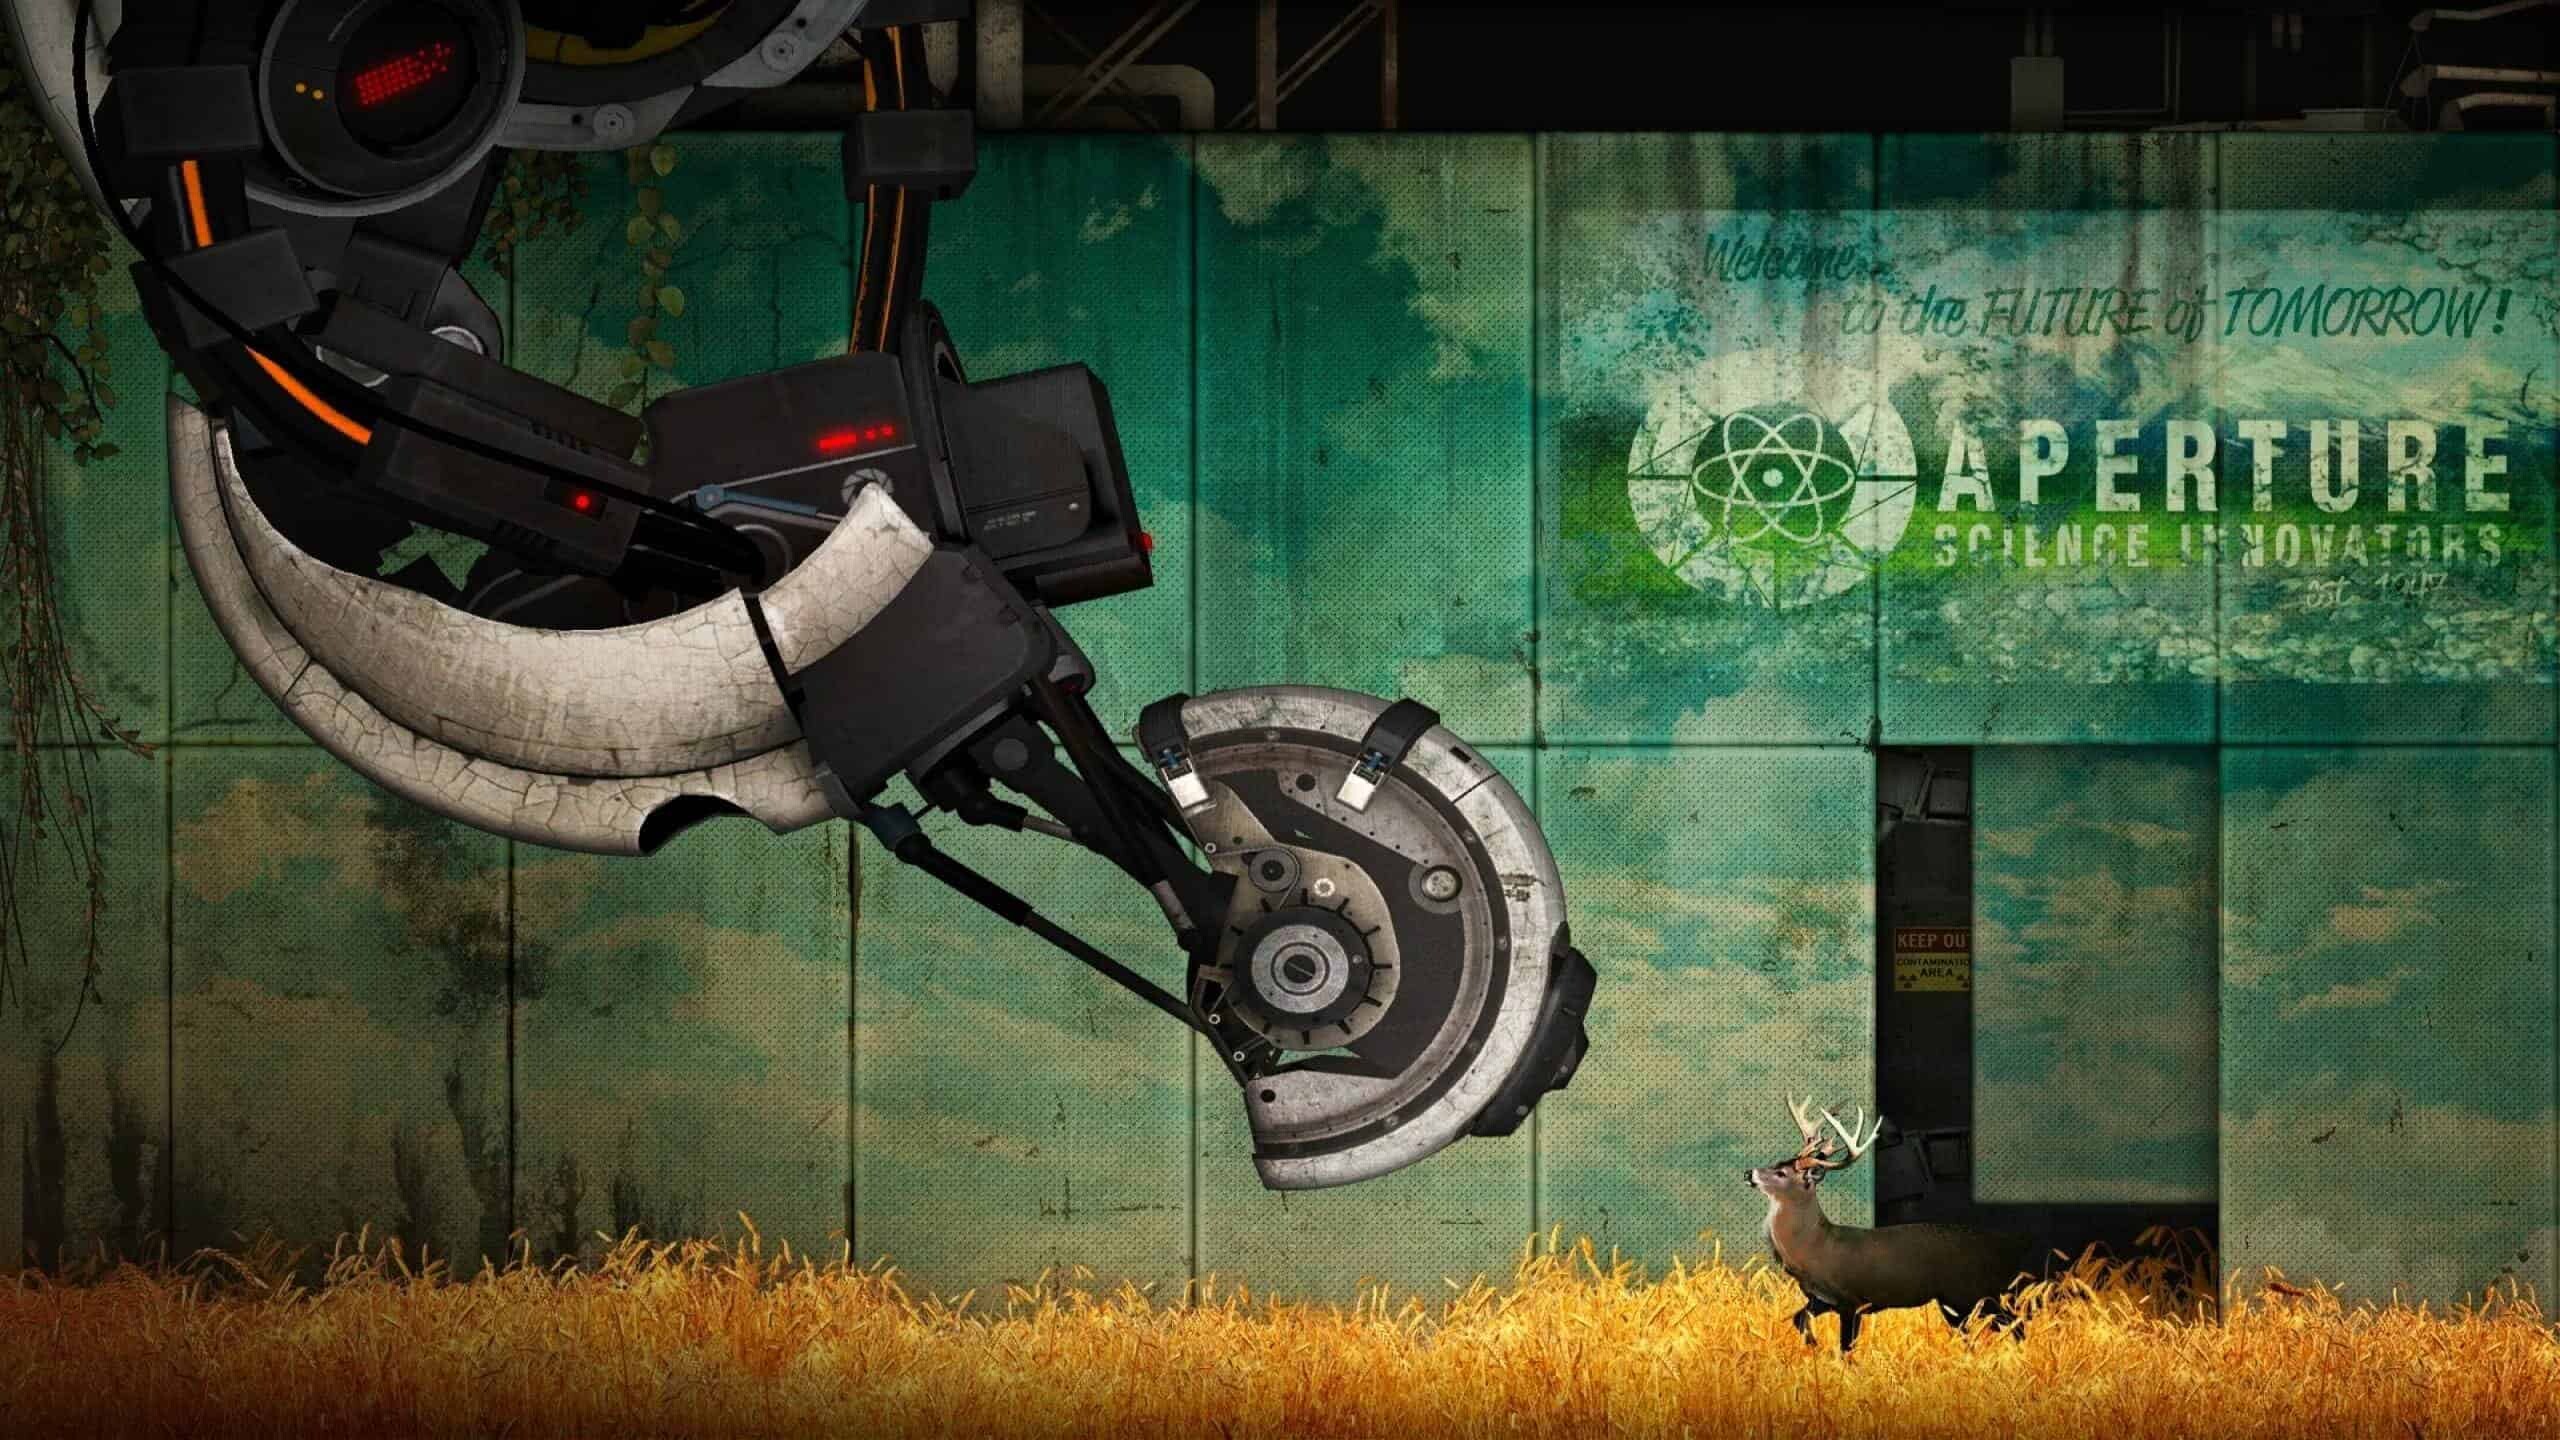 Portal 2 (Game): In the single-player campaign, players control Chell, who navigates the dilapidated Aperture Science Enrichment Center during its reconstruction by the supercomputer GLaDOS. 2560x1440 HD Background.